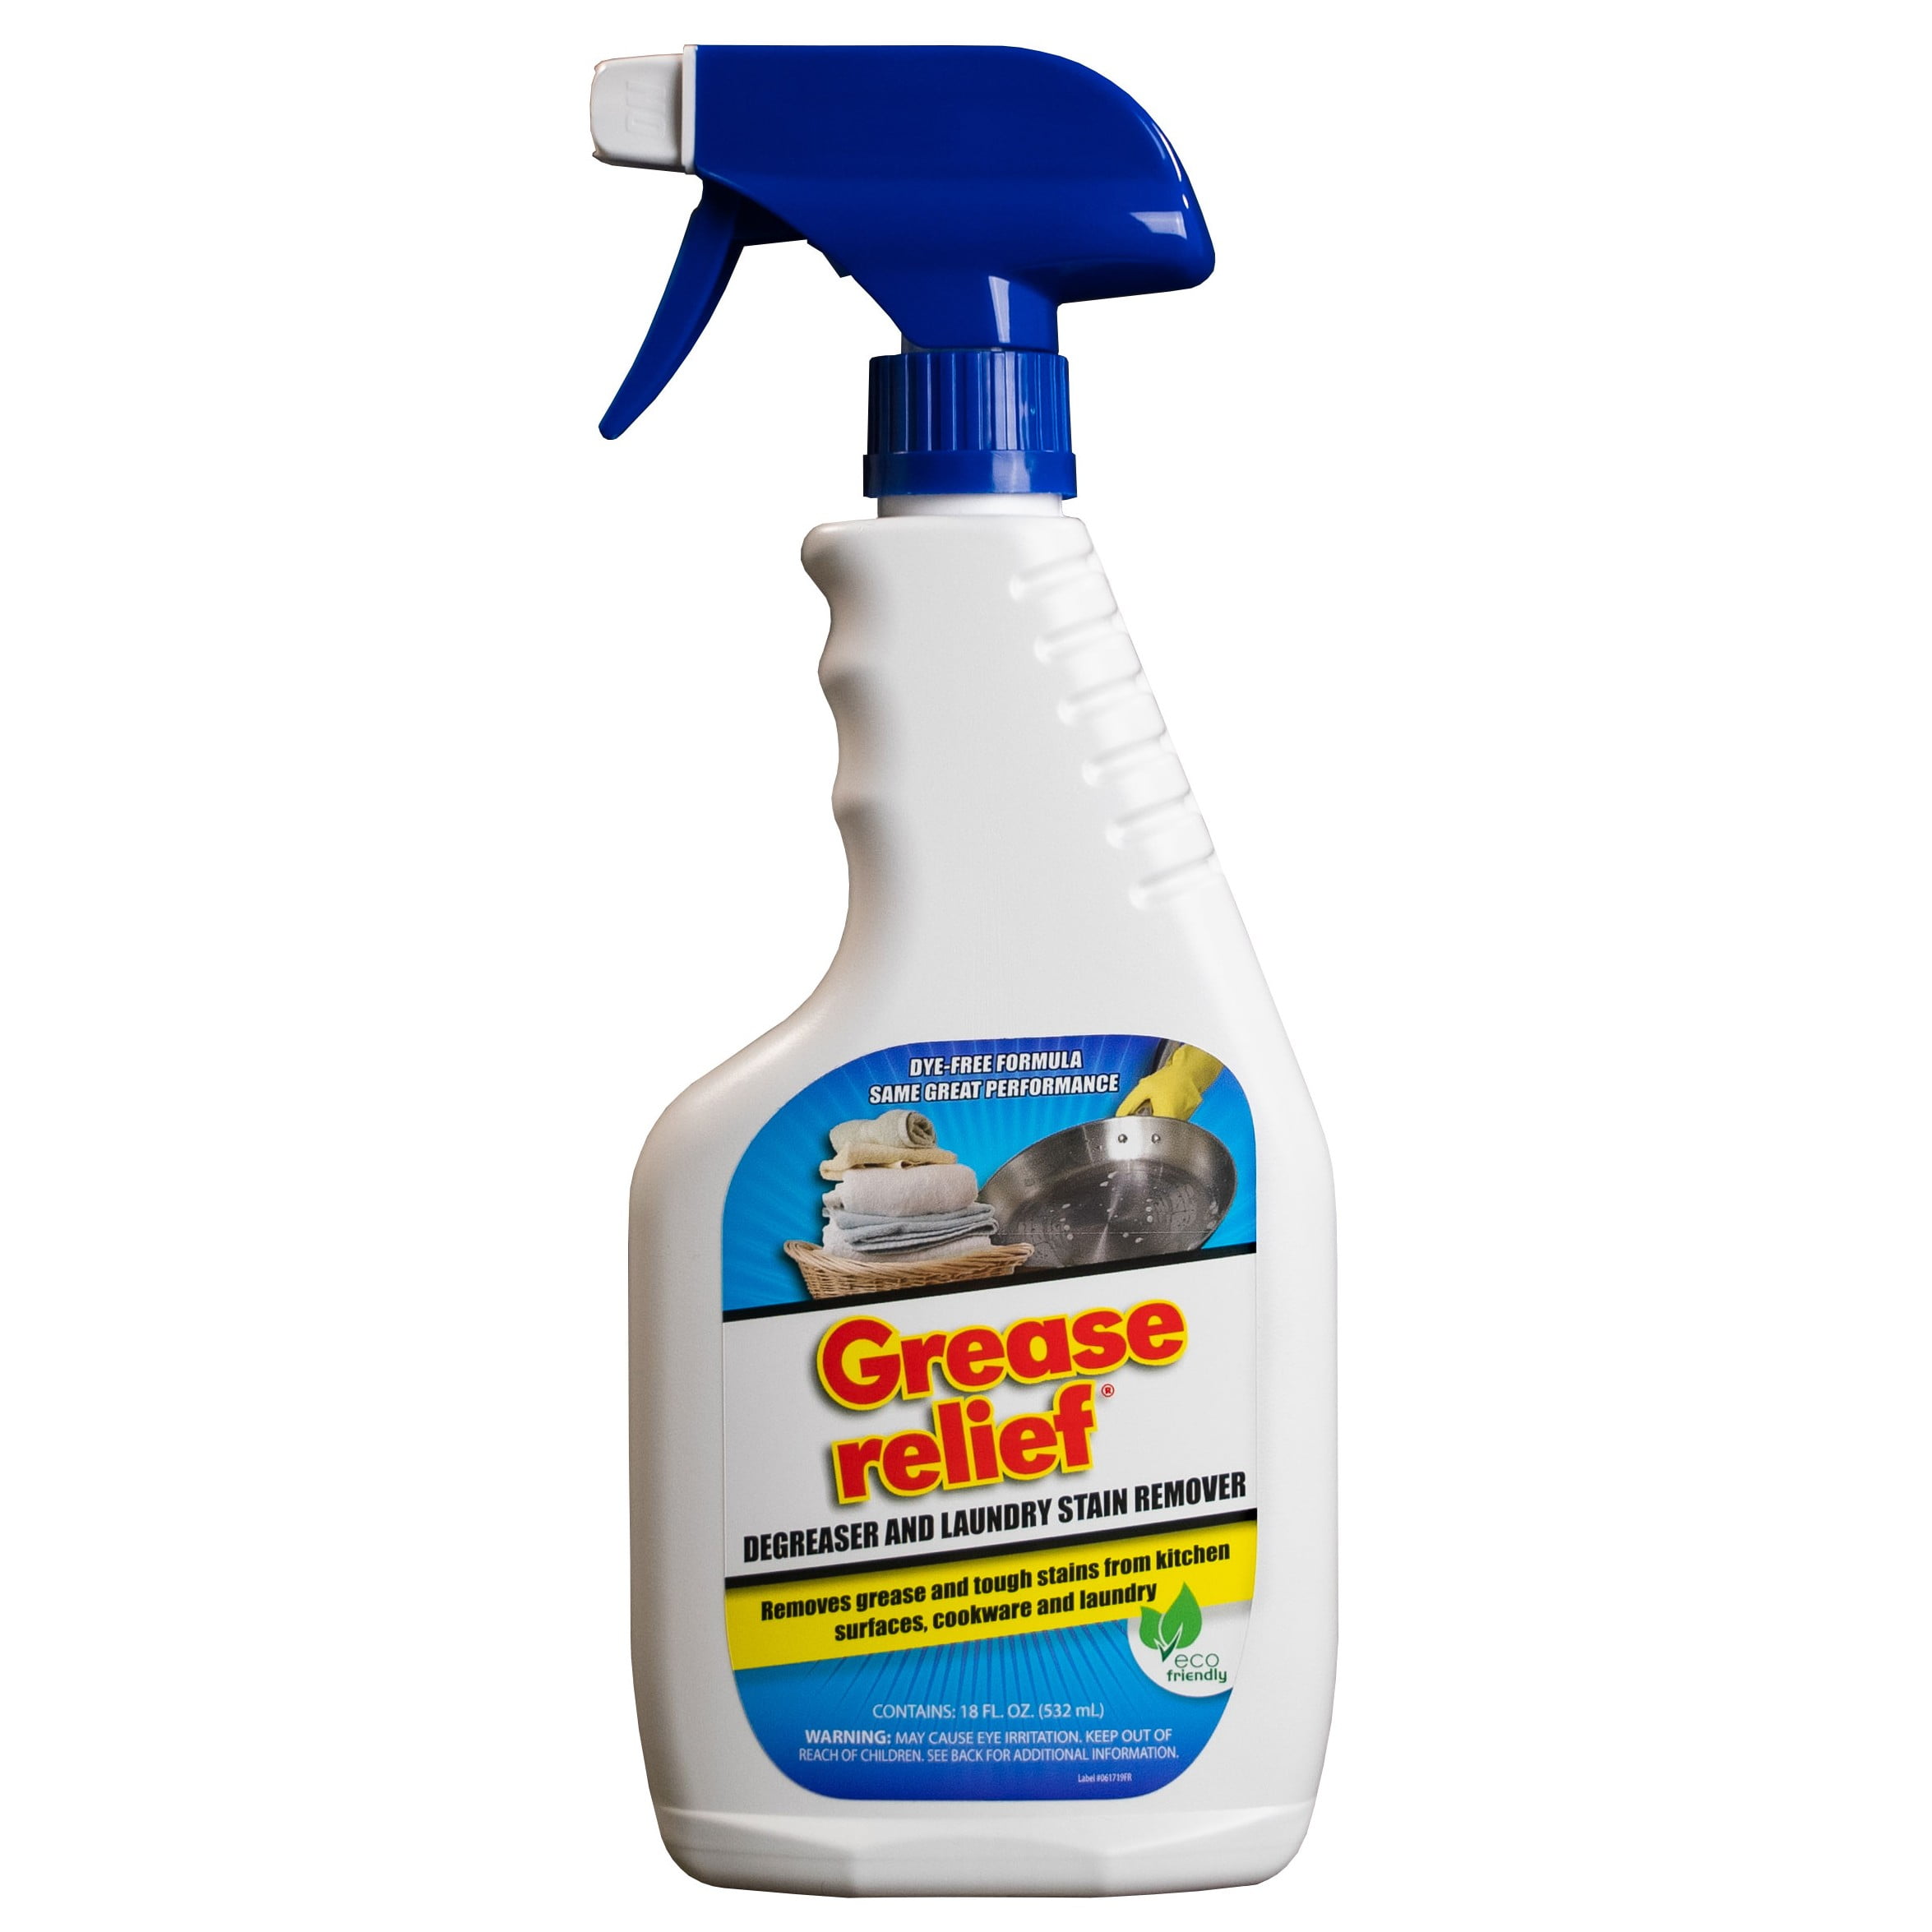 Burnishine Products. hand cleaner removes ink, grease, dirt and stains